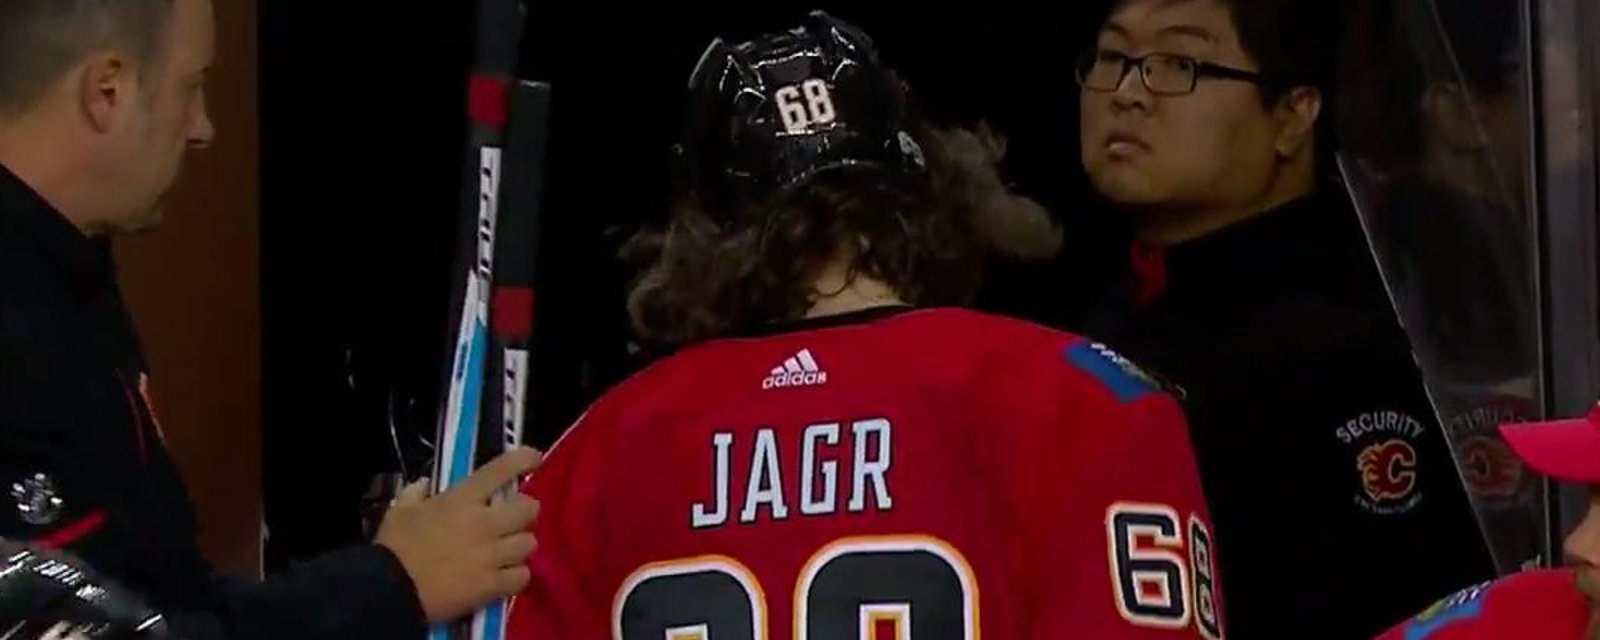 Injury report: Jagr may miss time with injury